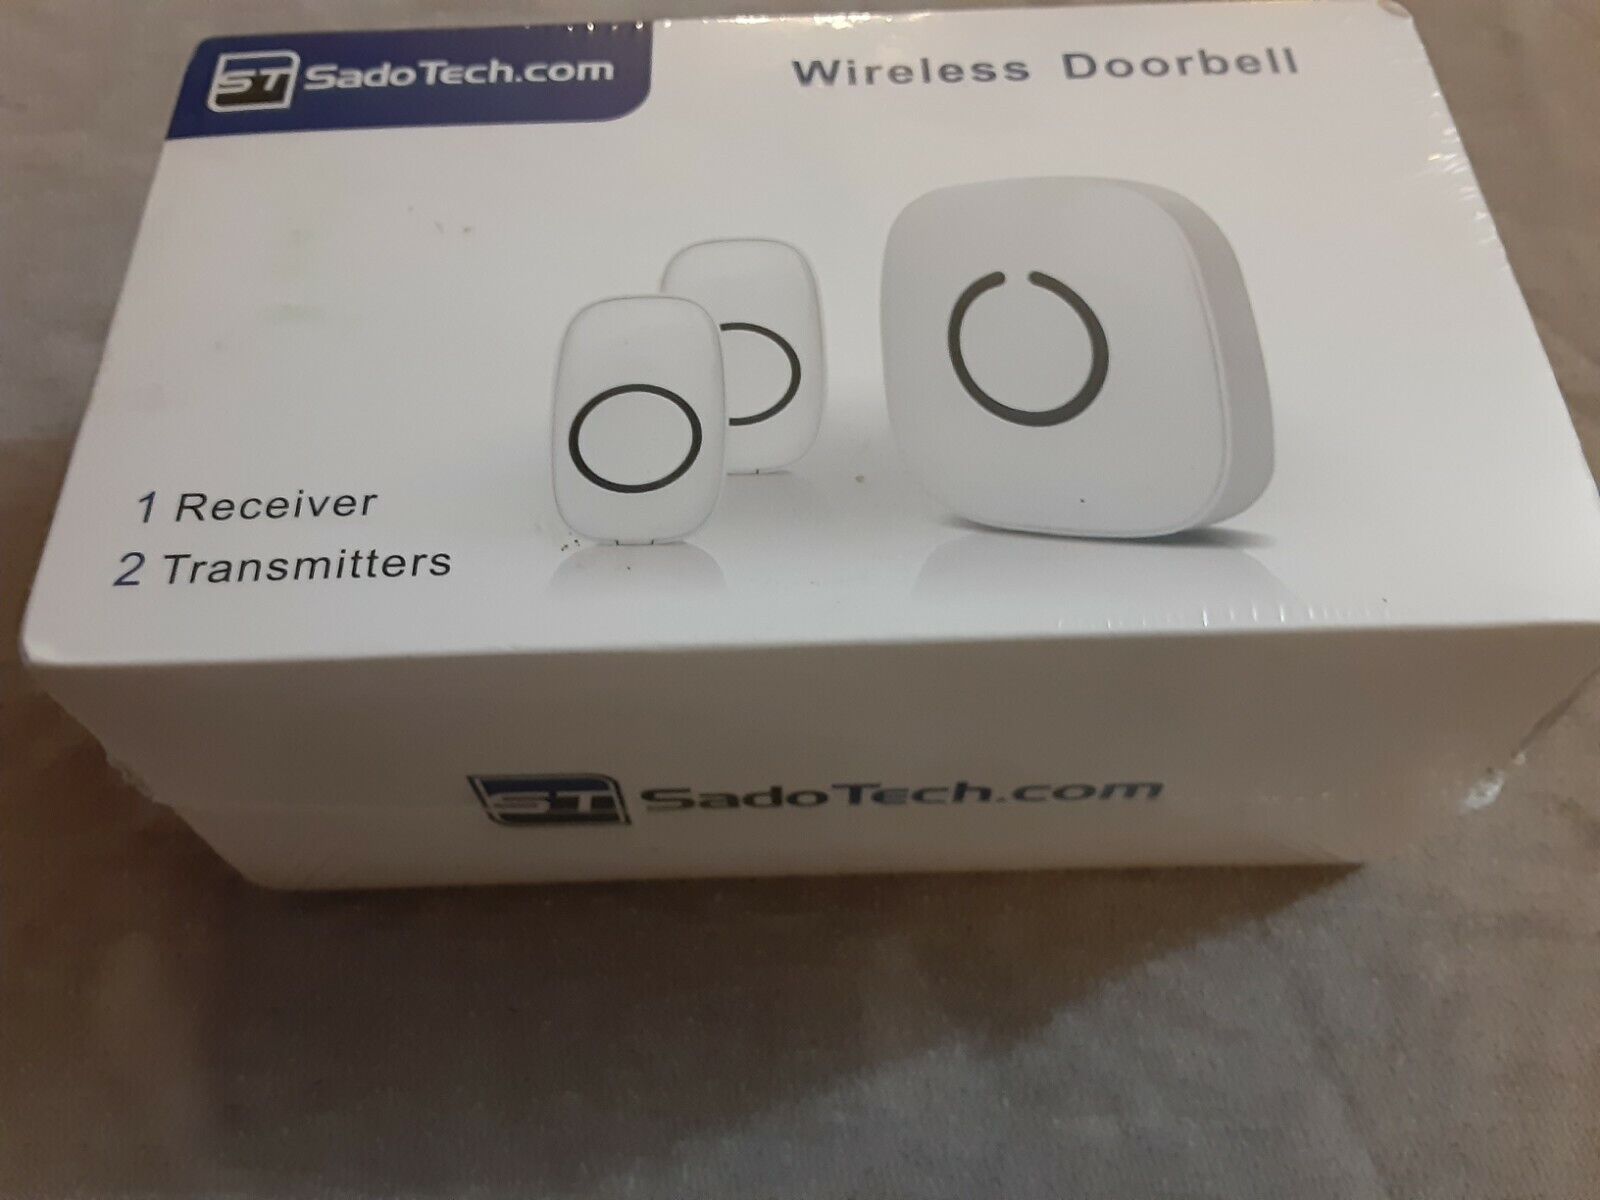 Sadotech Cx Mail order Waterproof Wireless Doorbell Kit Low price White Transmitters - With 2